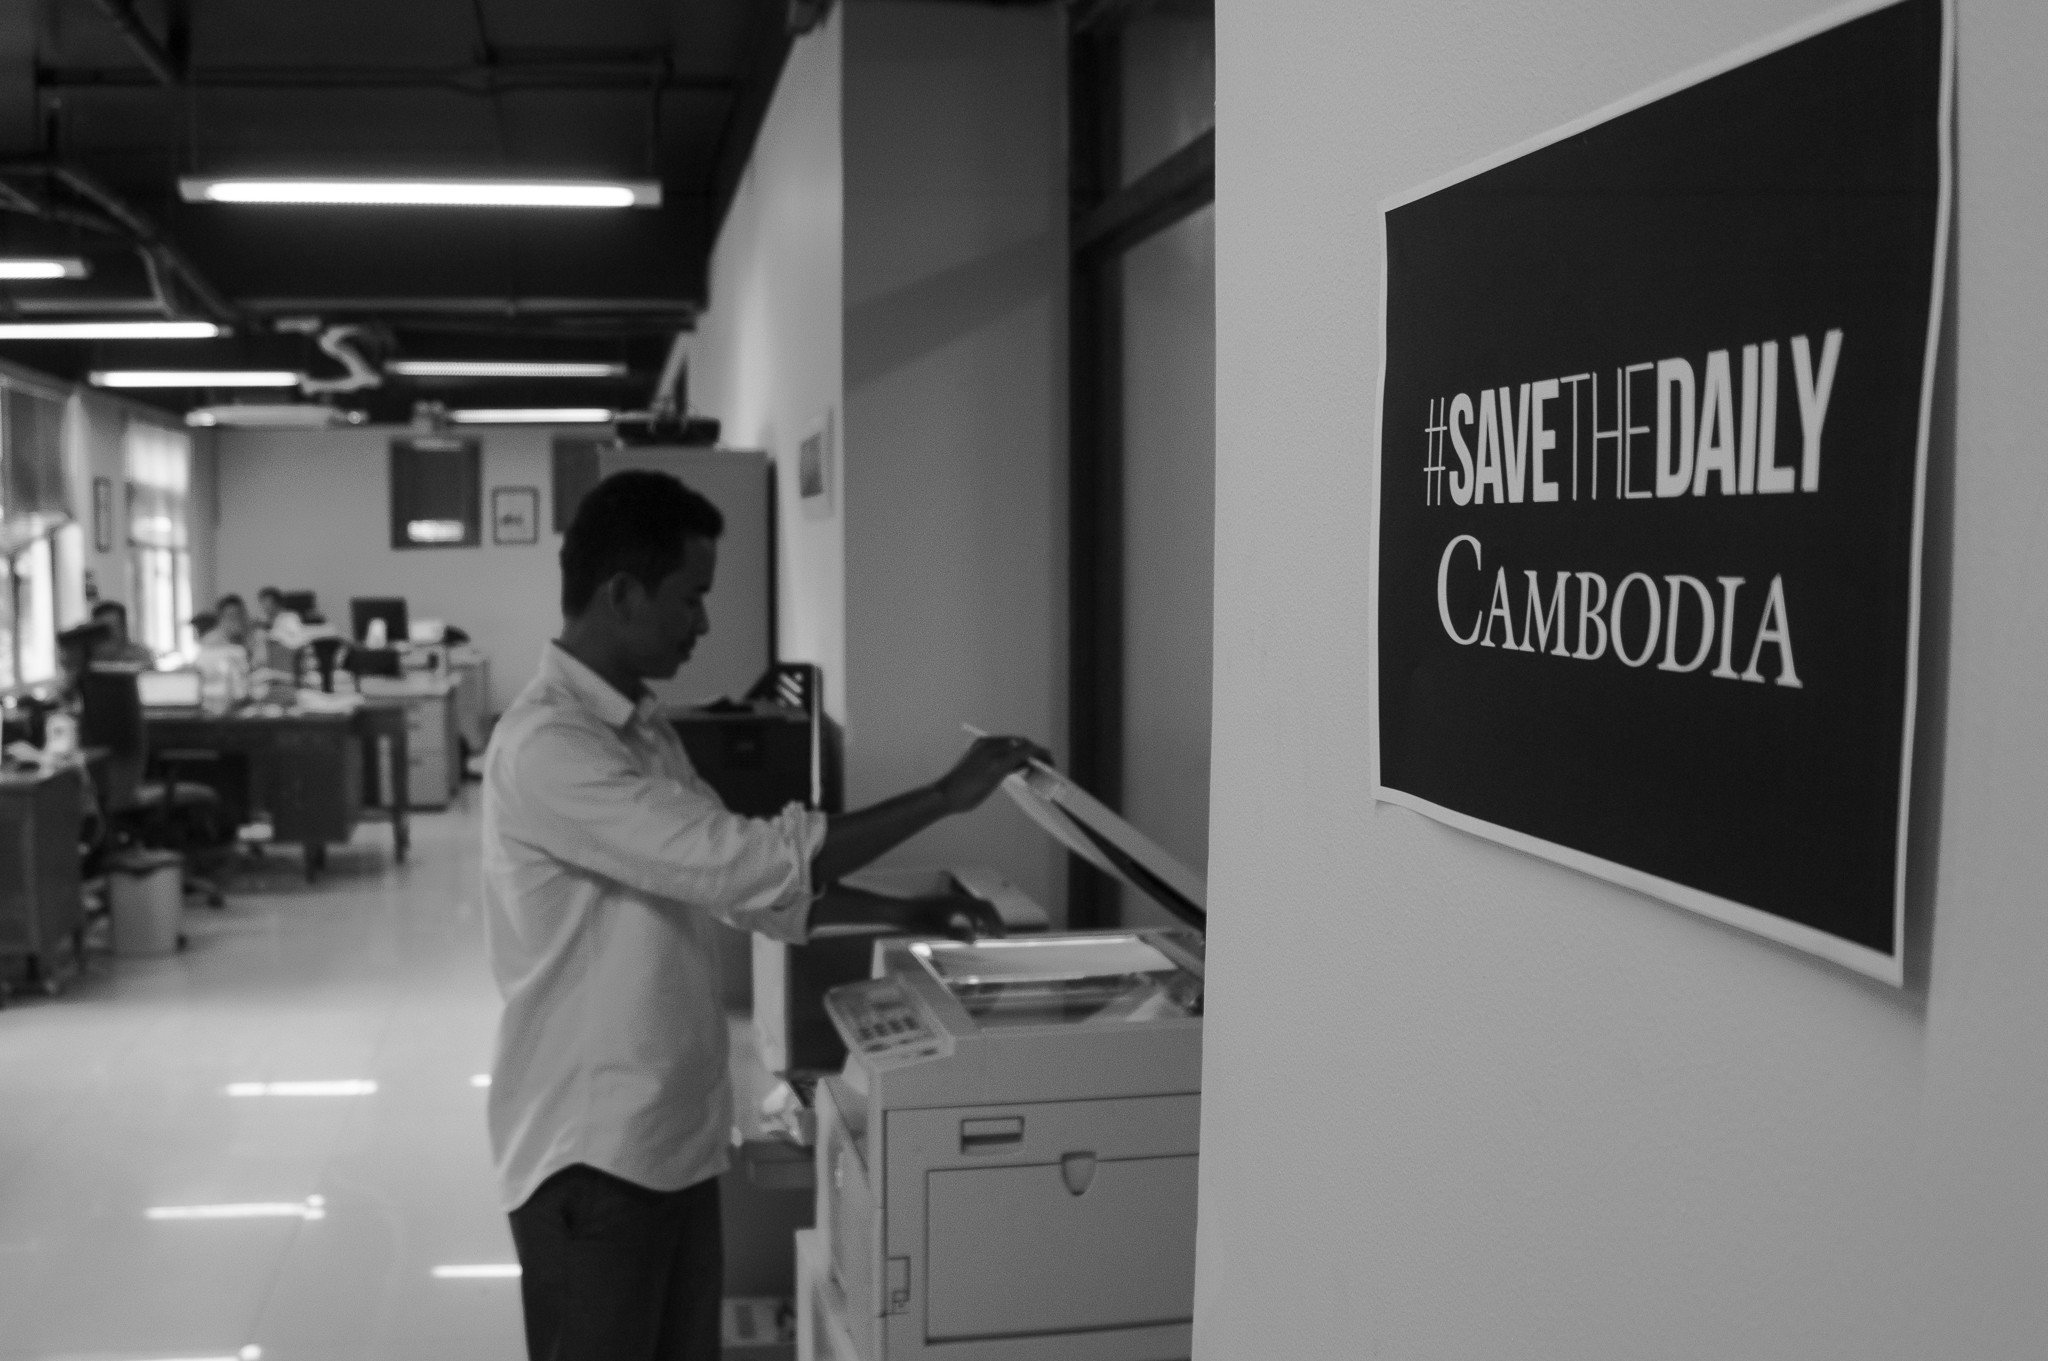 Chansy Chhorn, The Cambodia Daily’s news editor, photocopying in the offices. Photo: Nathan A. Thompson